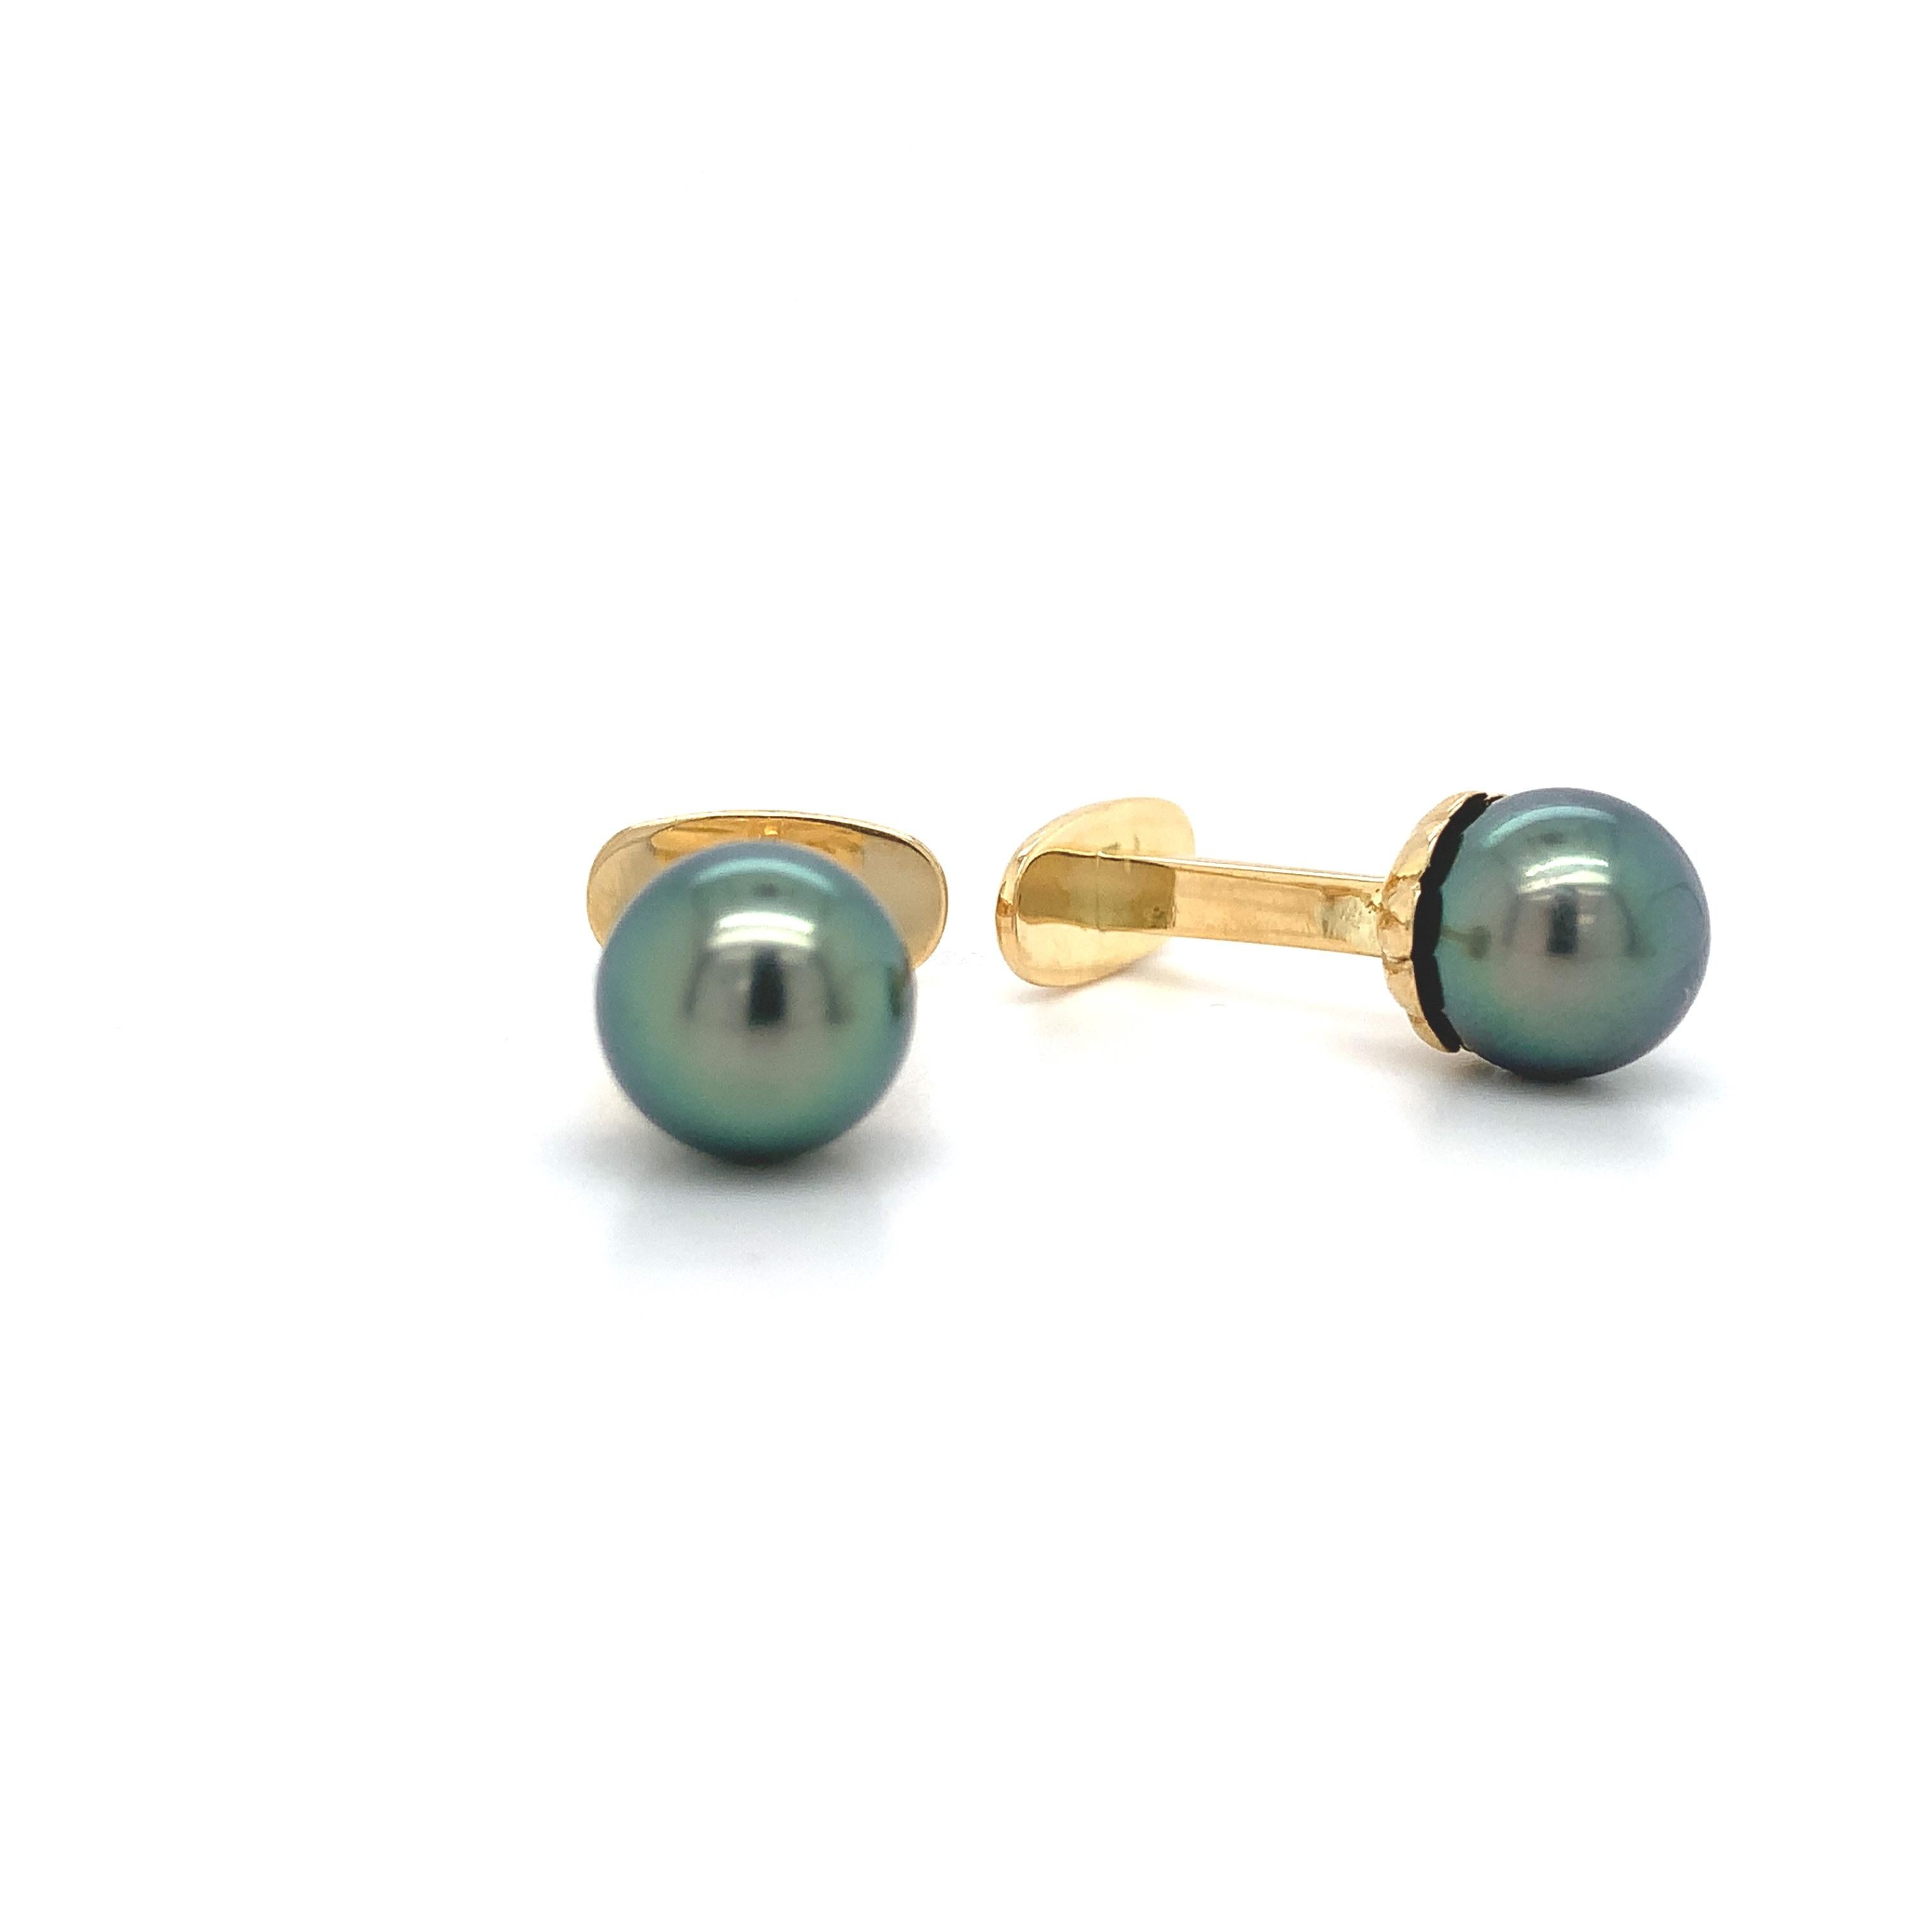 A pair of 14K yellow gold cufflinks featuring large Tahitian black cultured Pearls. The pearls are completely round, are free from blemishes, and have a peacock natural color. The Pearls measure 9mm.  The pair weighs 4.72dwt and custom, newly made.